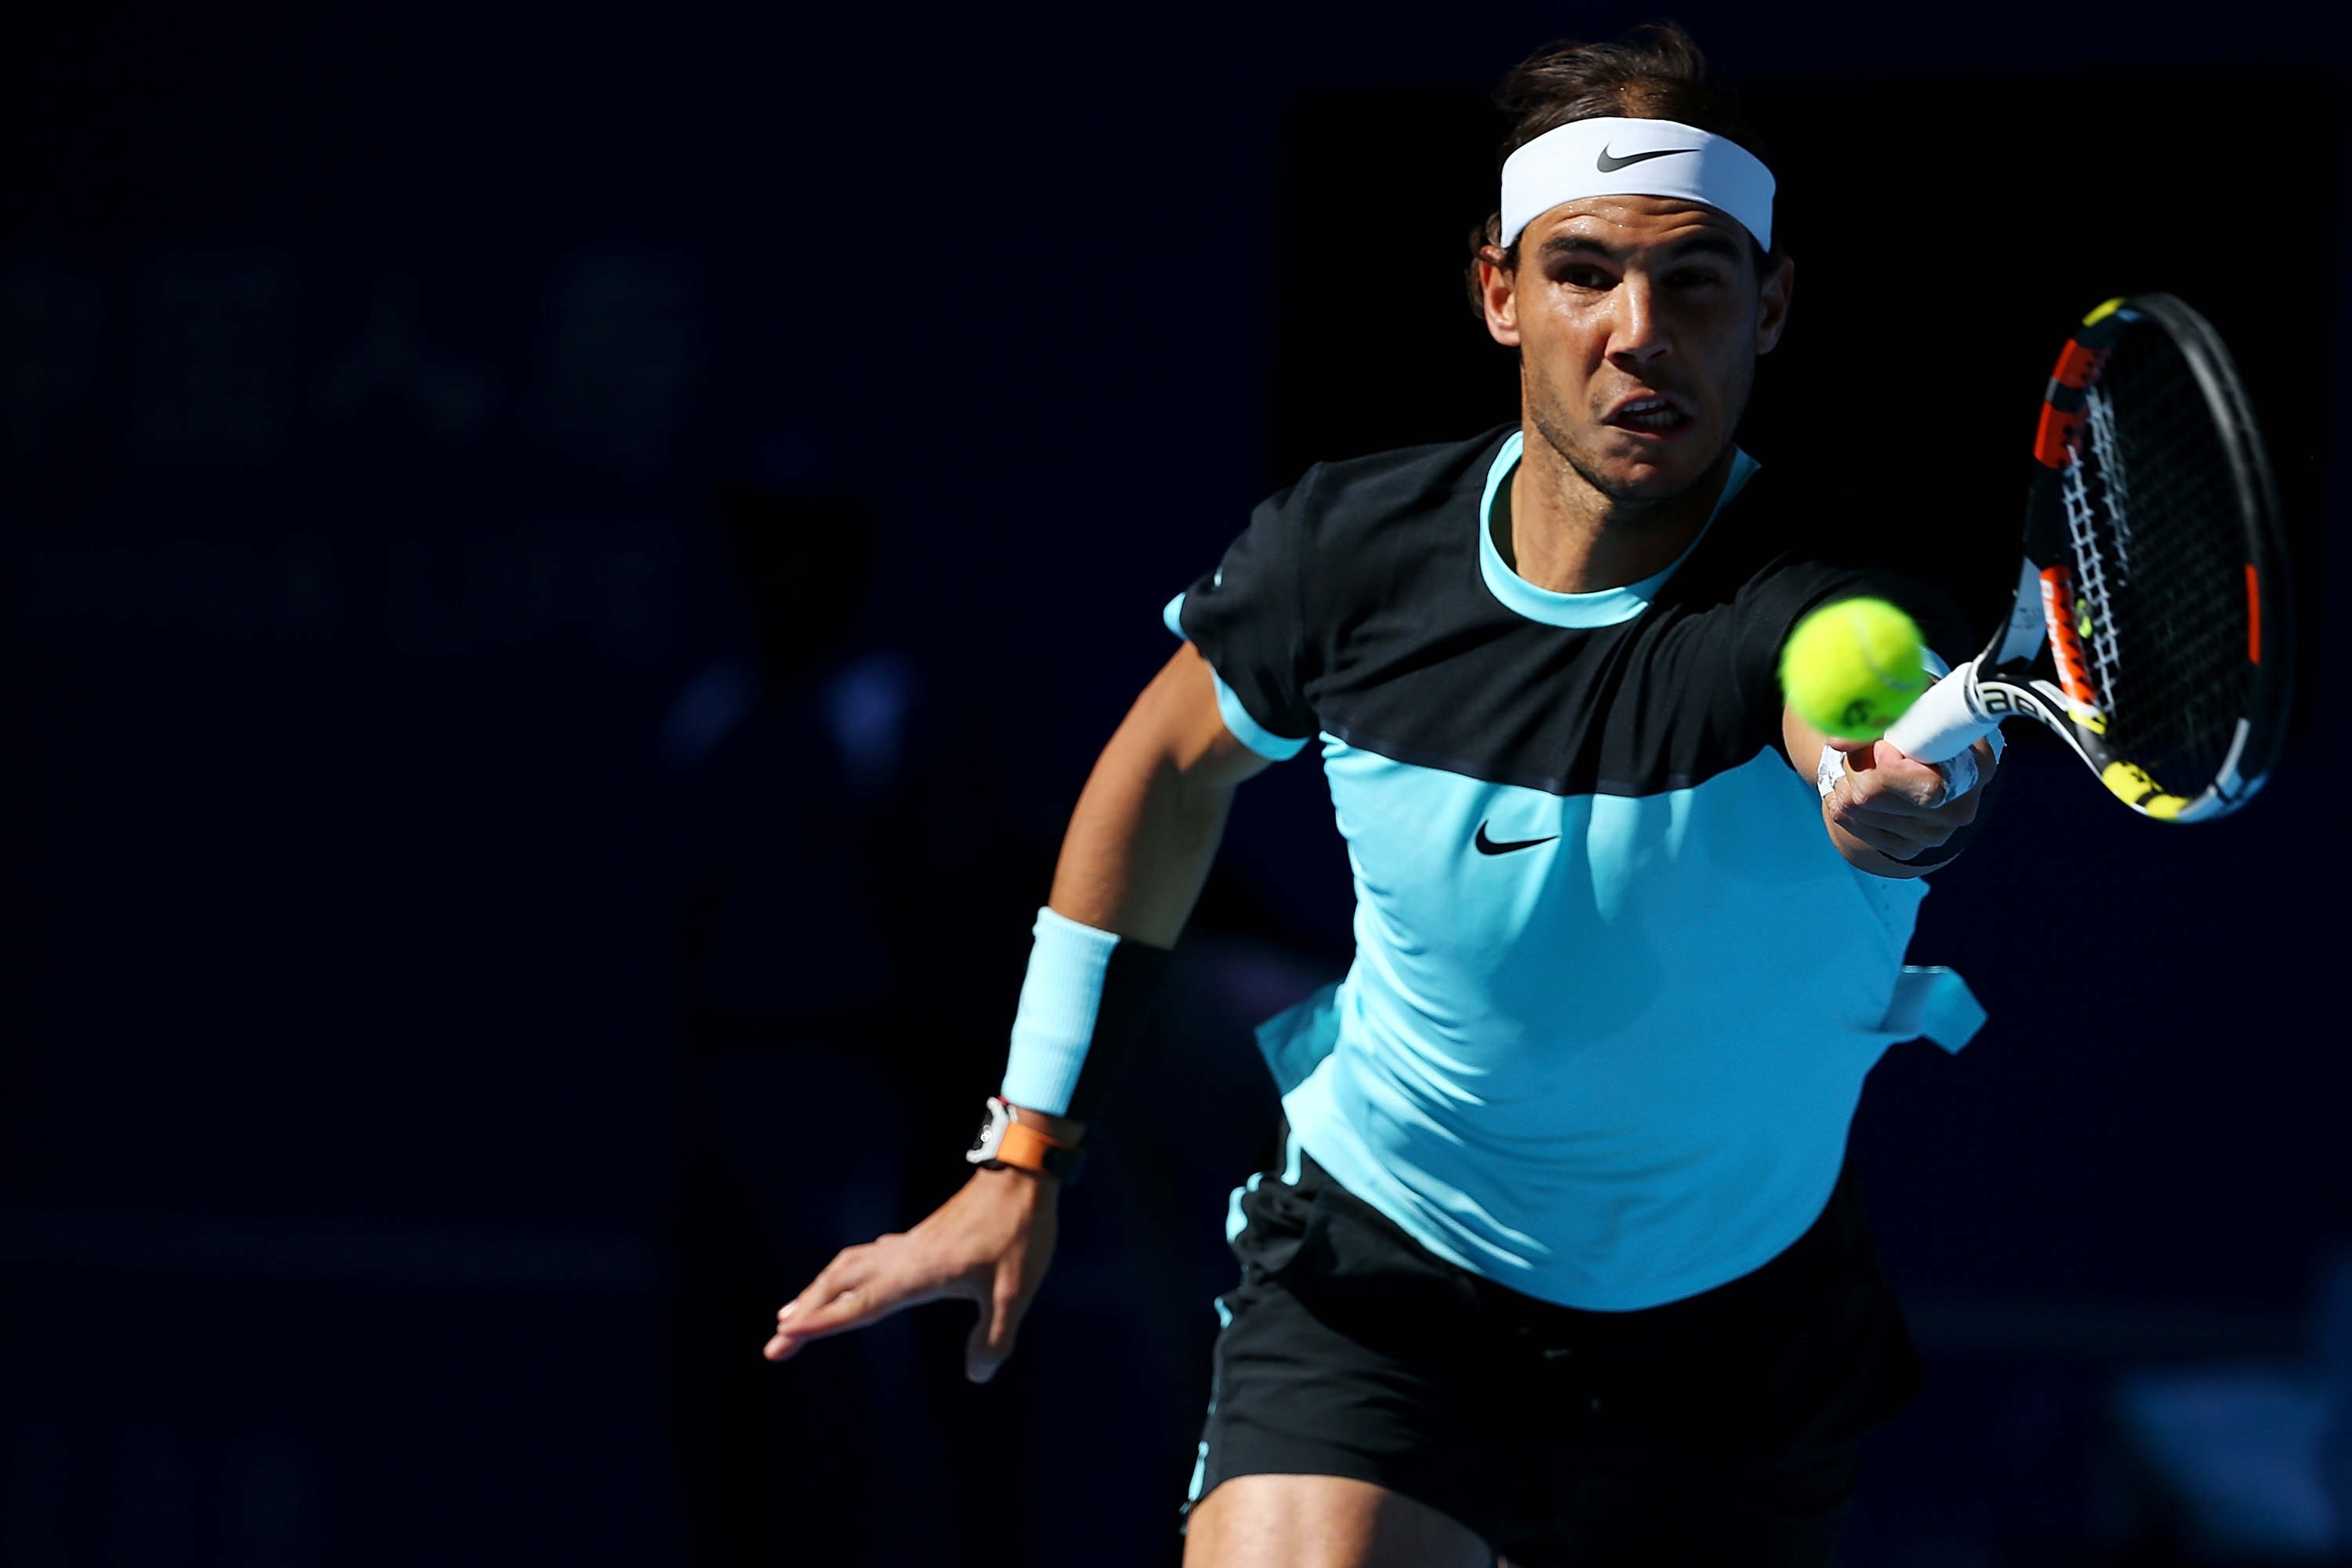 rafael-nadal-in-action-against-jack-sock-at-the-china-open-1